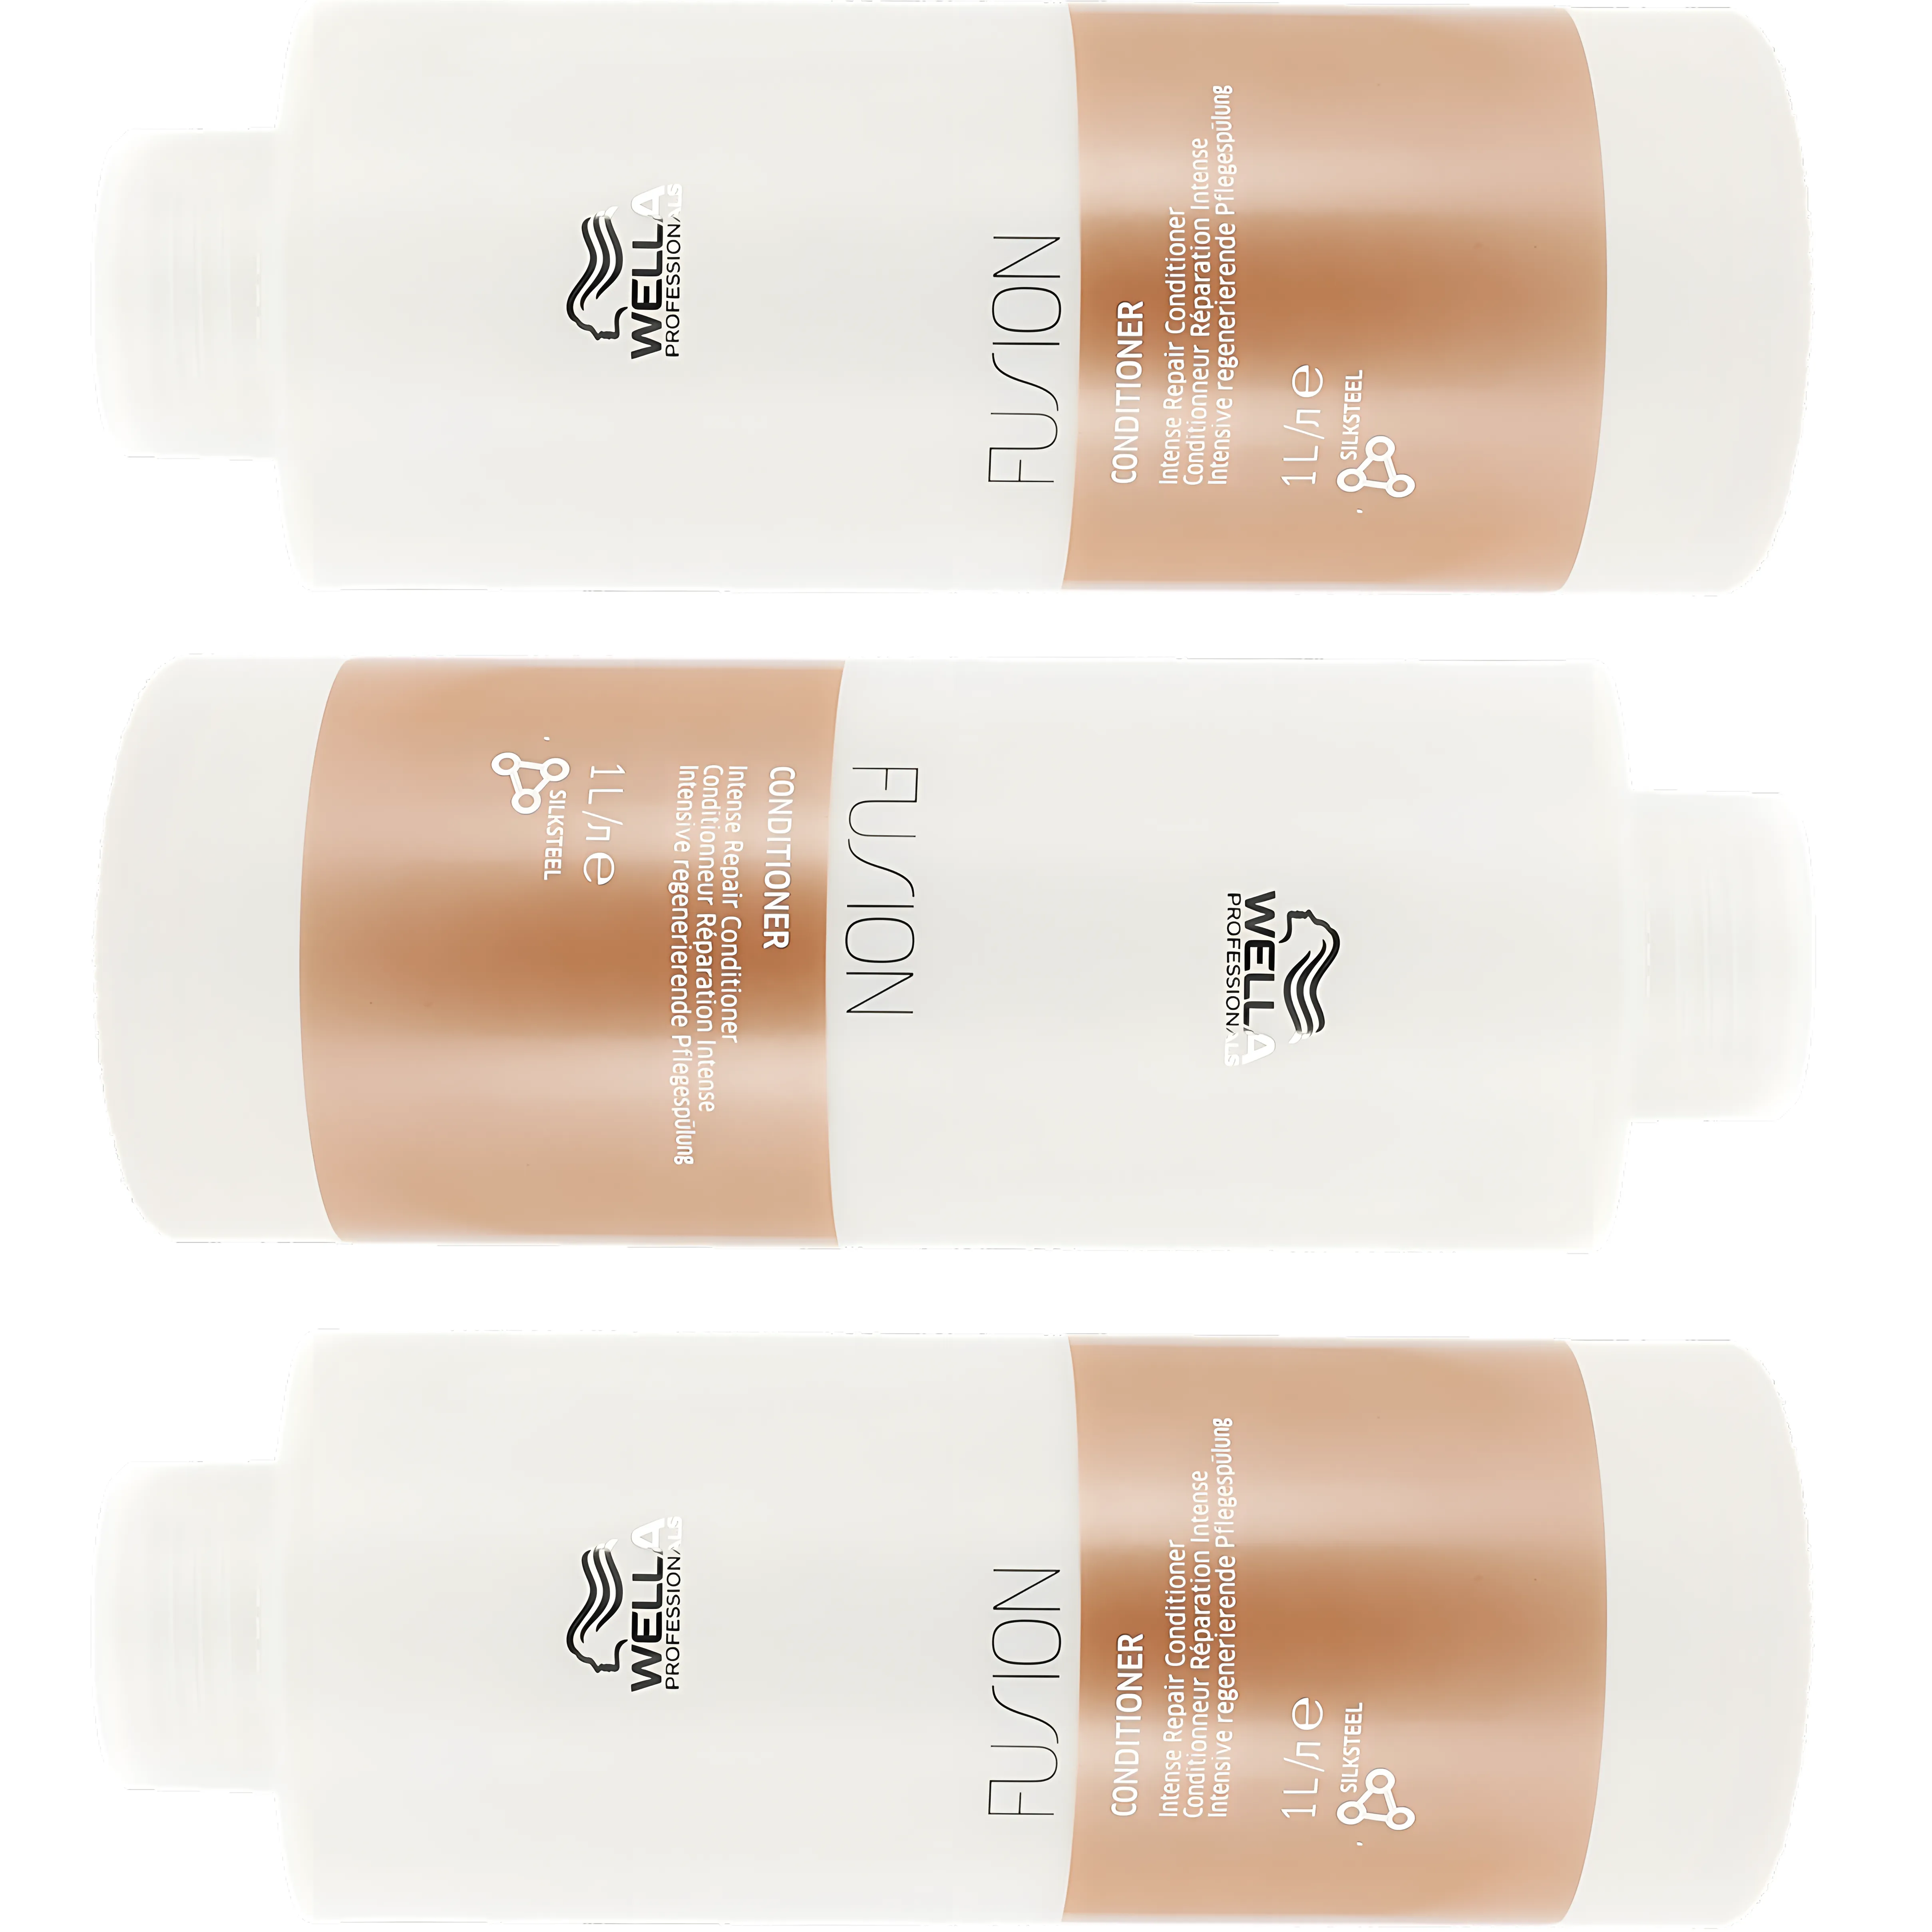 Free Wella Professionals Haircare Samples